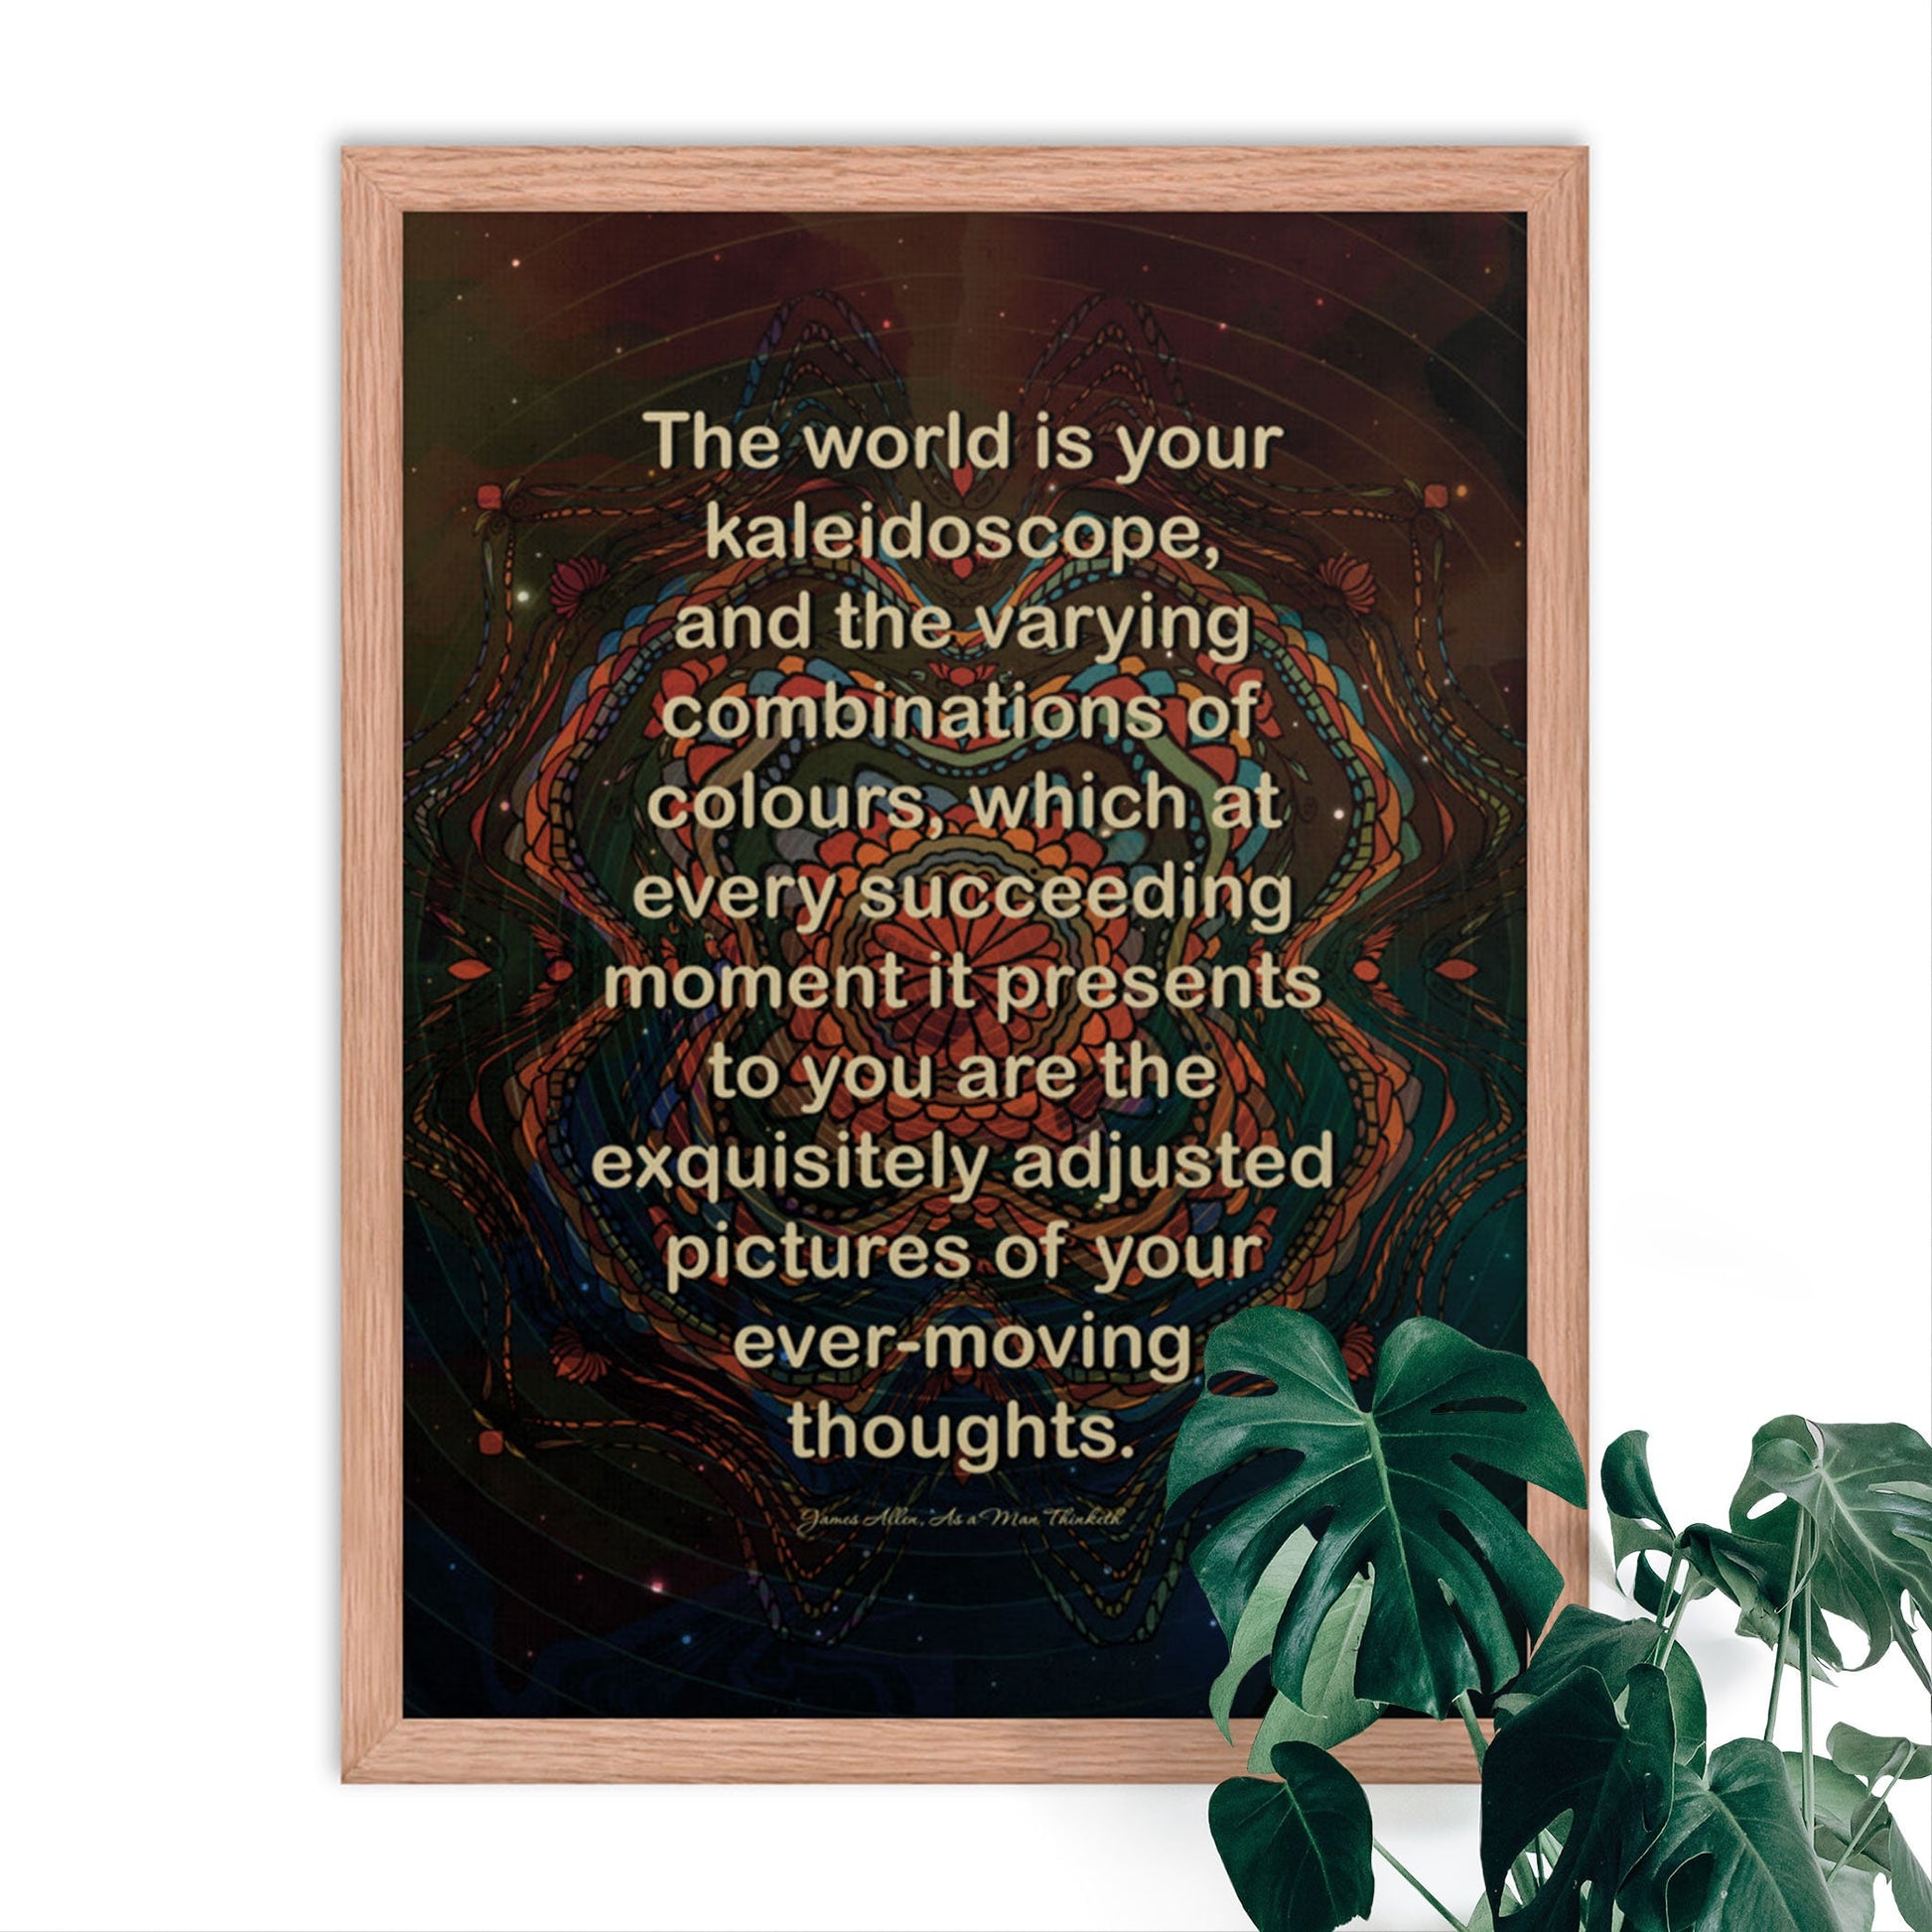 The world is y0ur kaleidoscope quote by james Allen with kaleidoscope art pattern poster in red oak frame